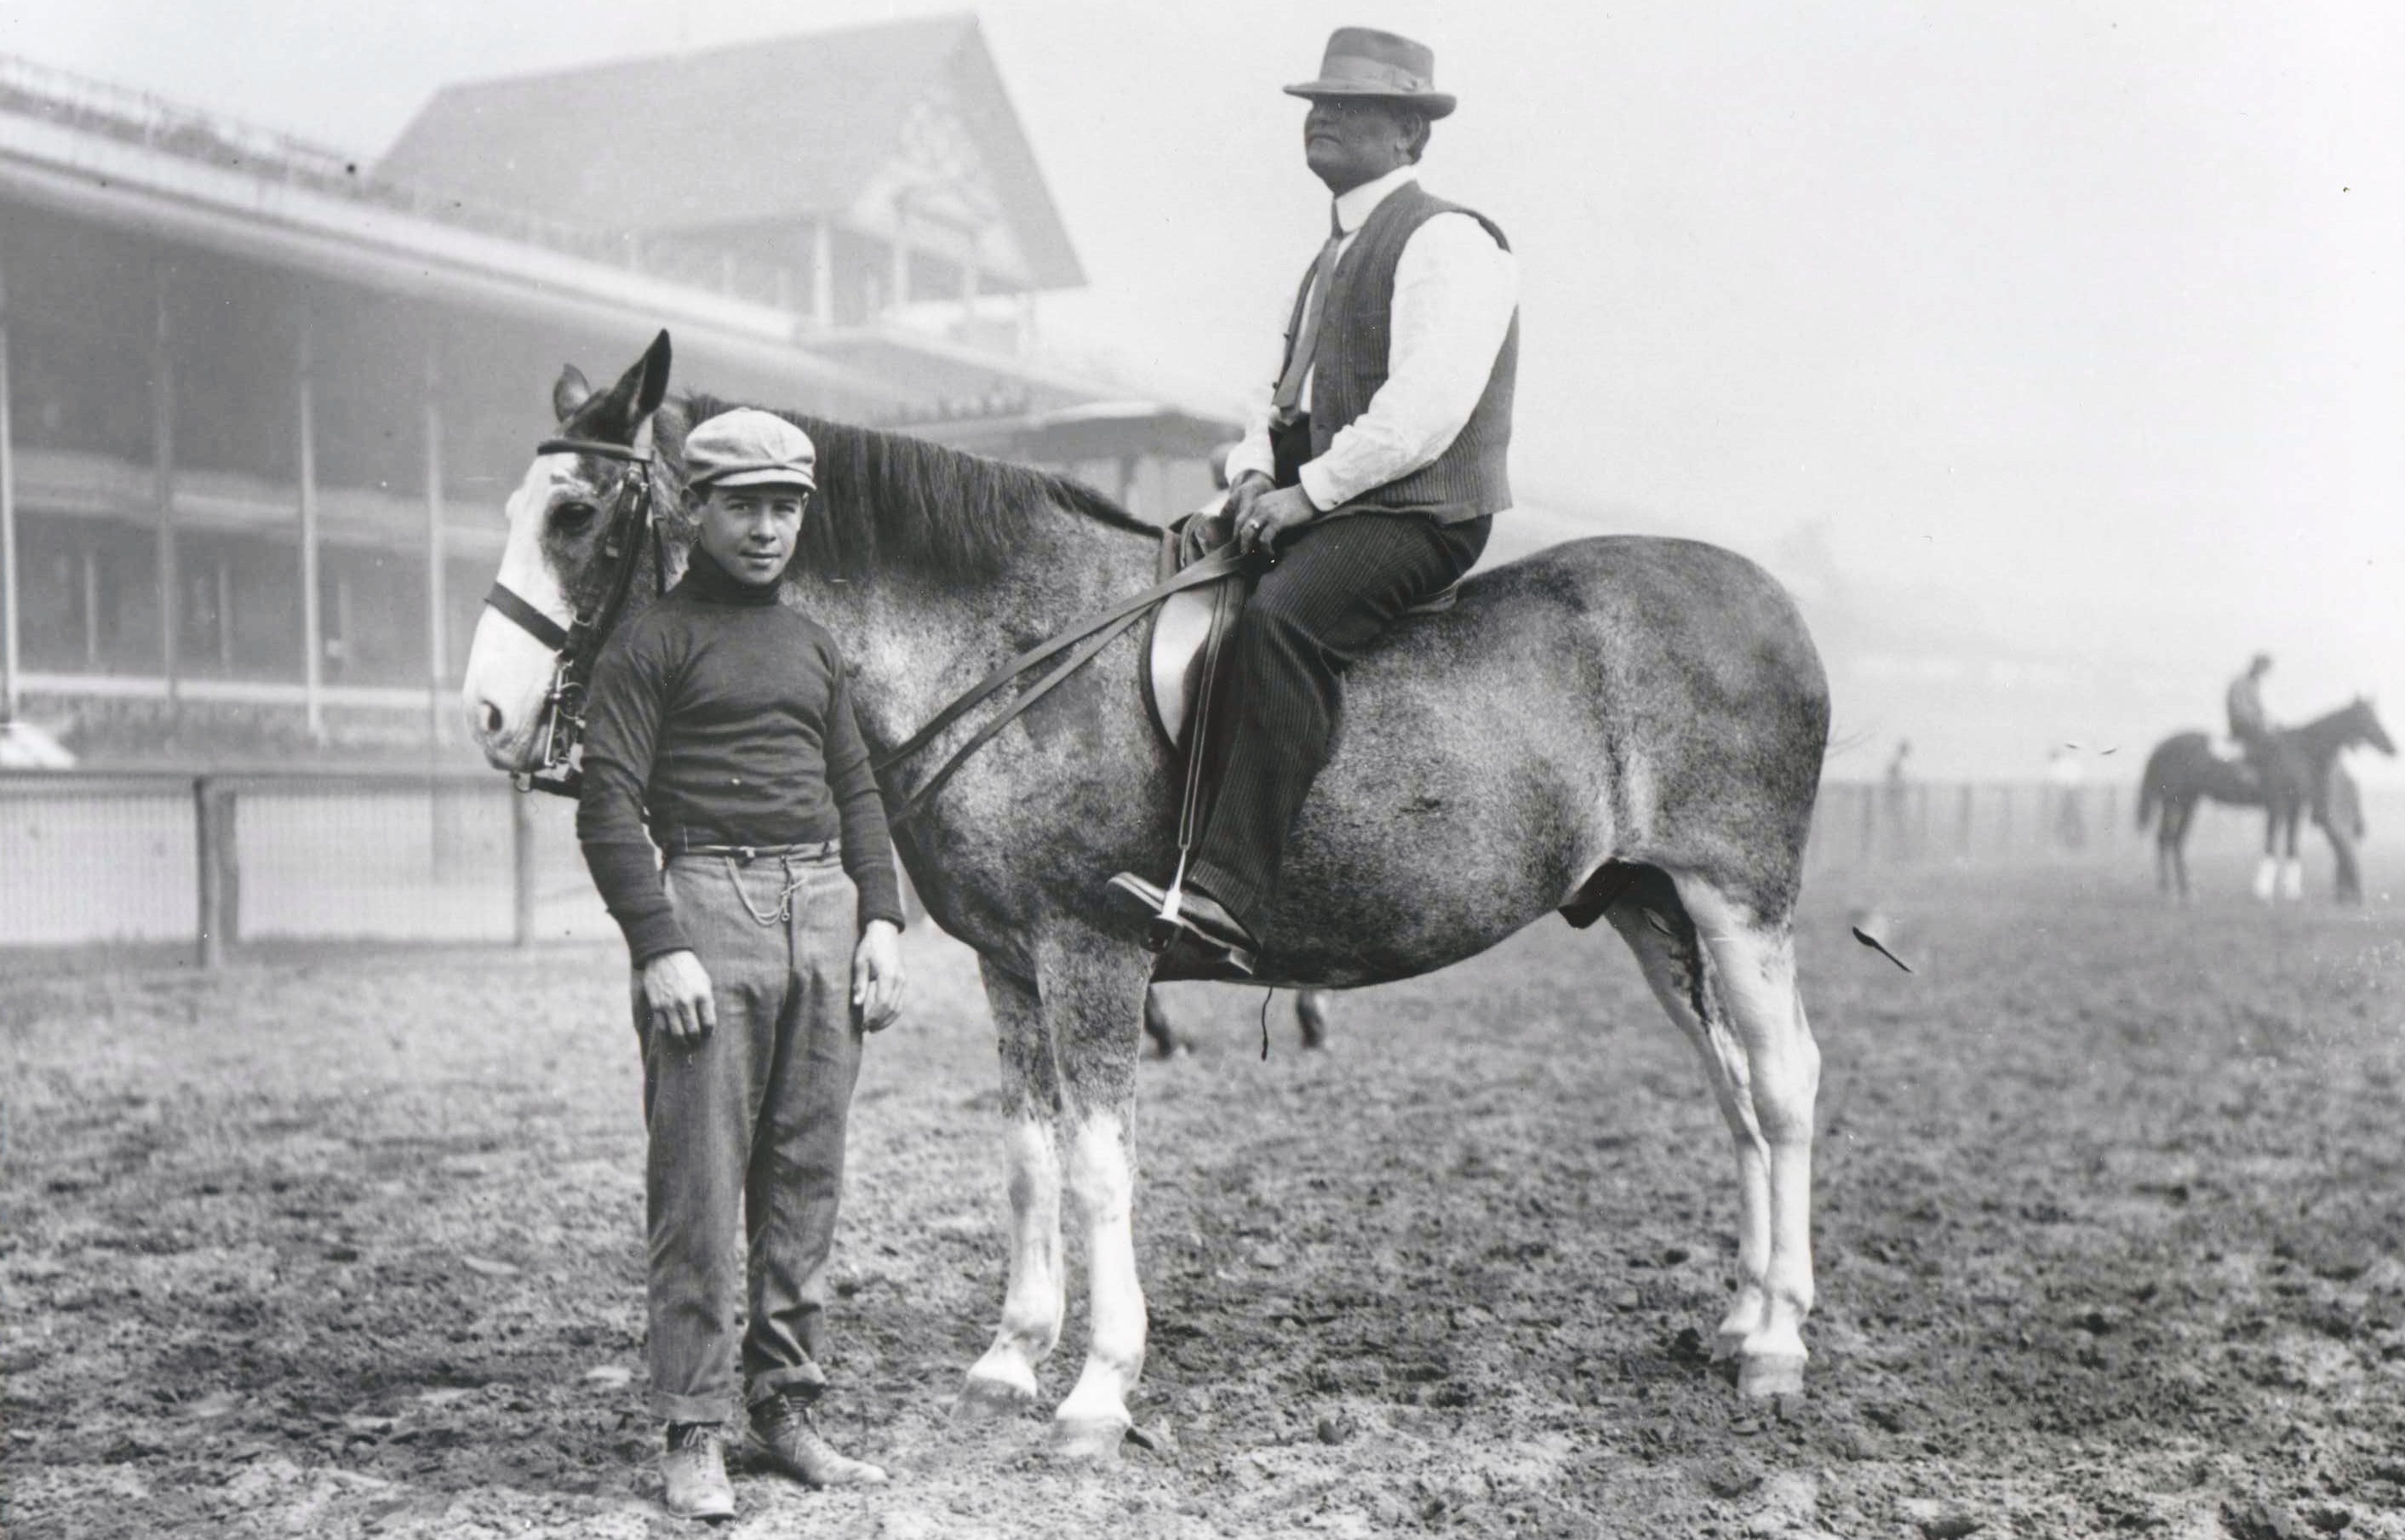 Jockey Joe Notter stands by trainer James G. Rowe, Sr. on horseback (Keeneland Library Cook Collection/Museum Collection)